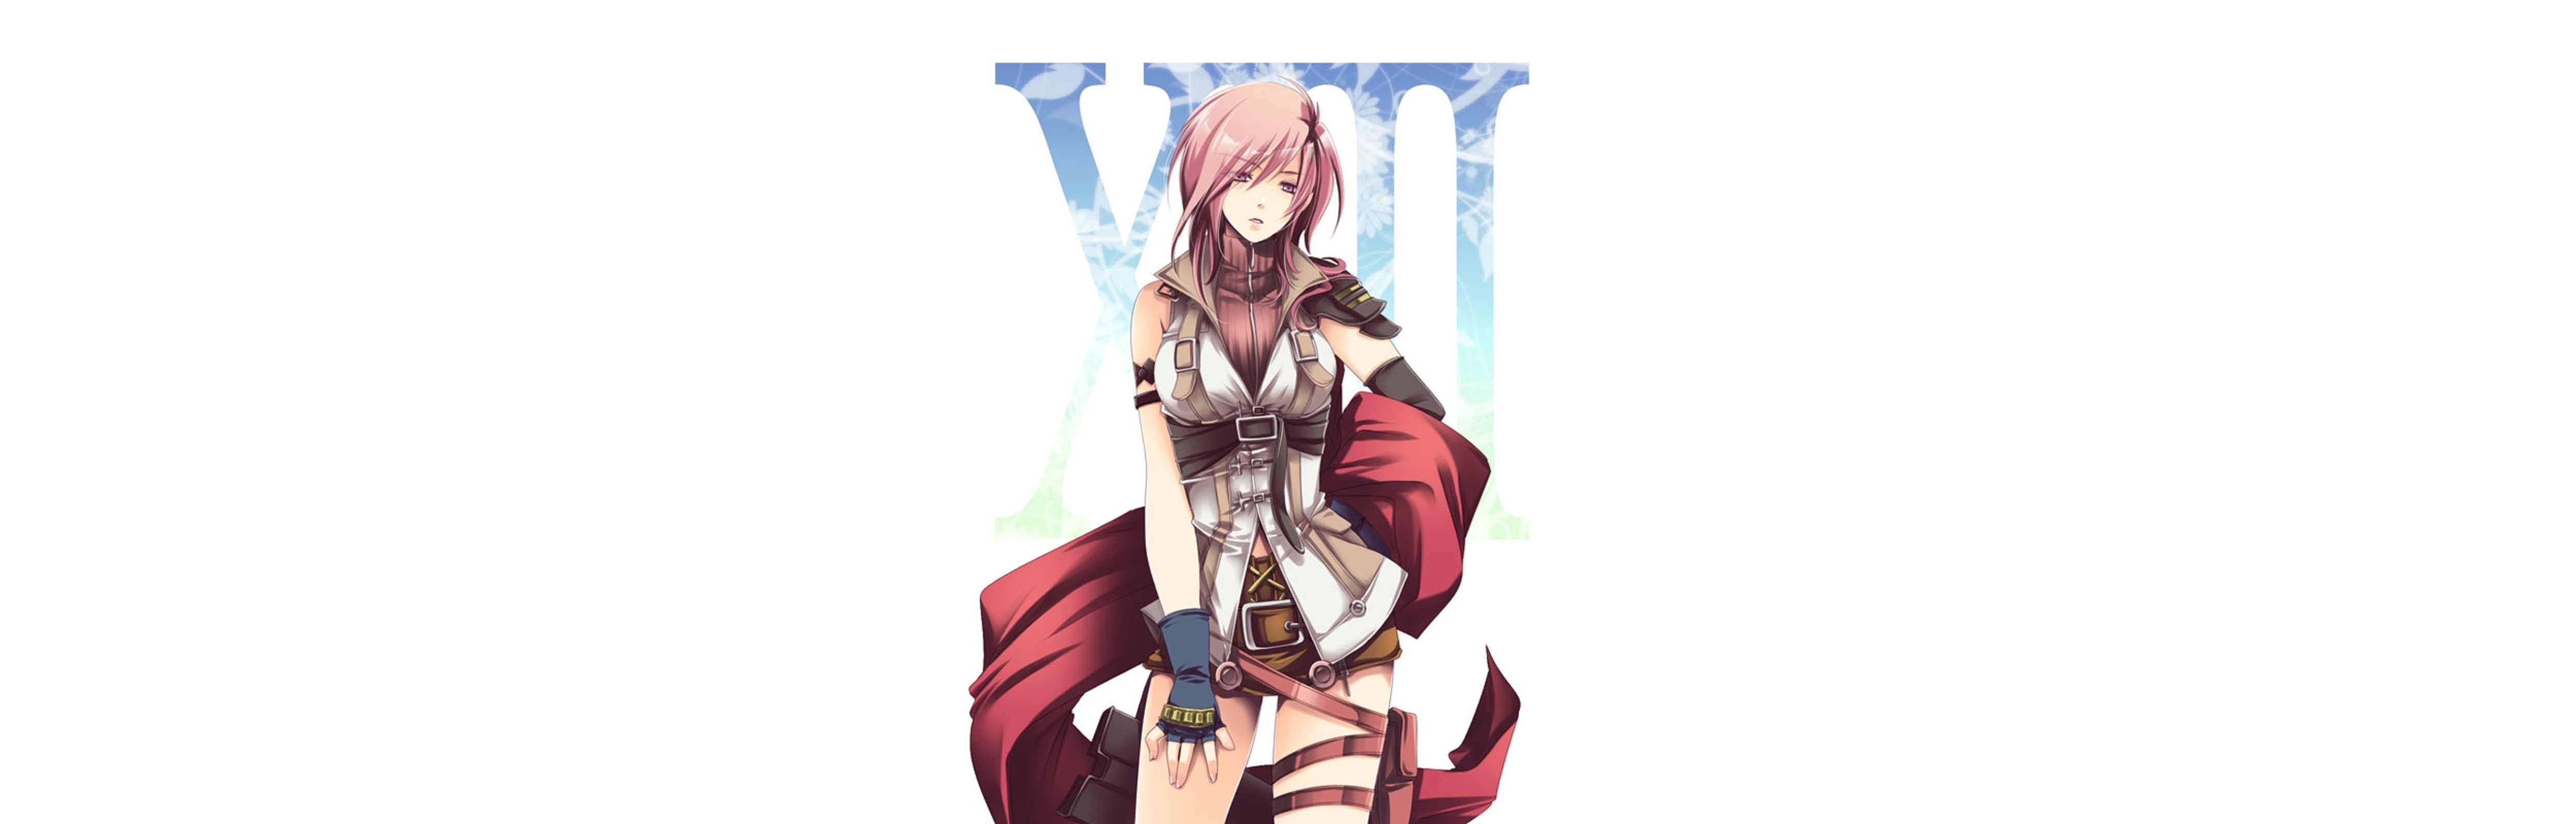 Final Fantasy XIII Picture